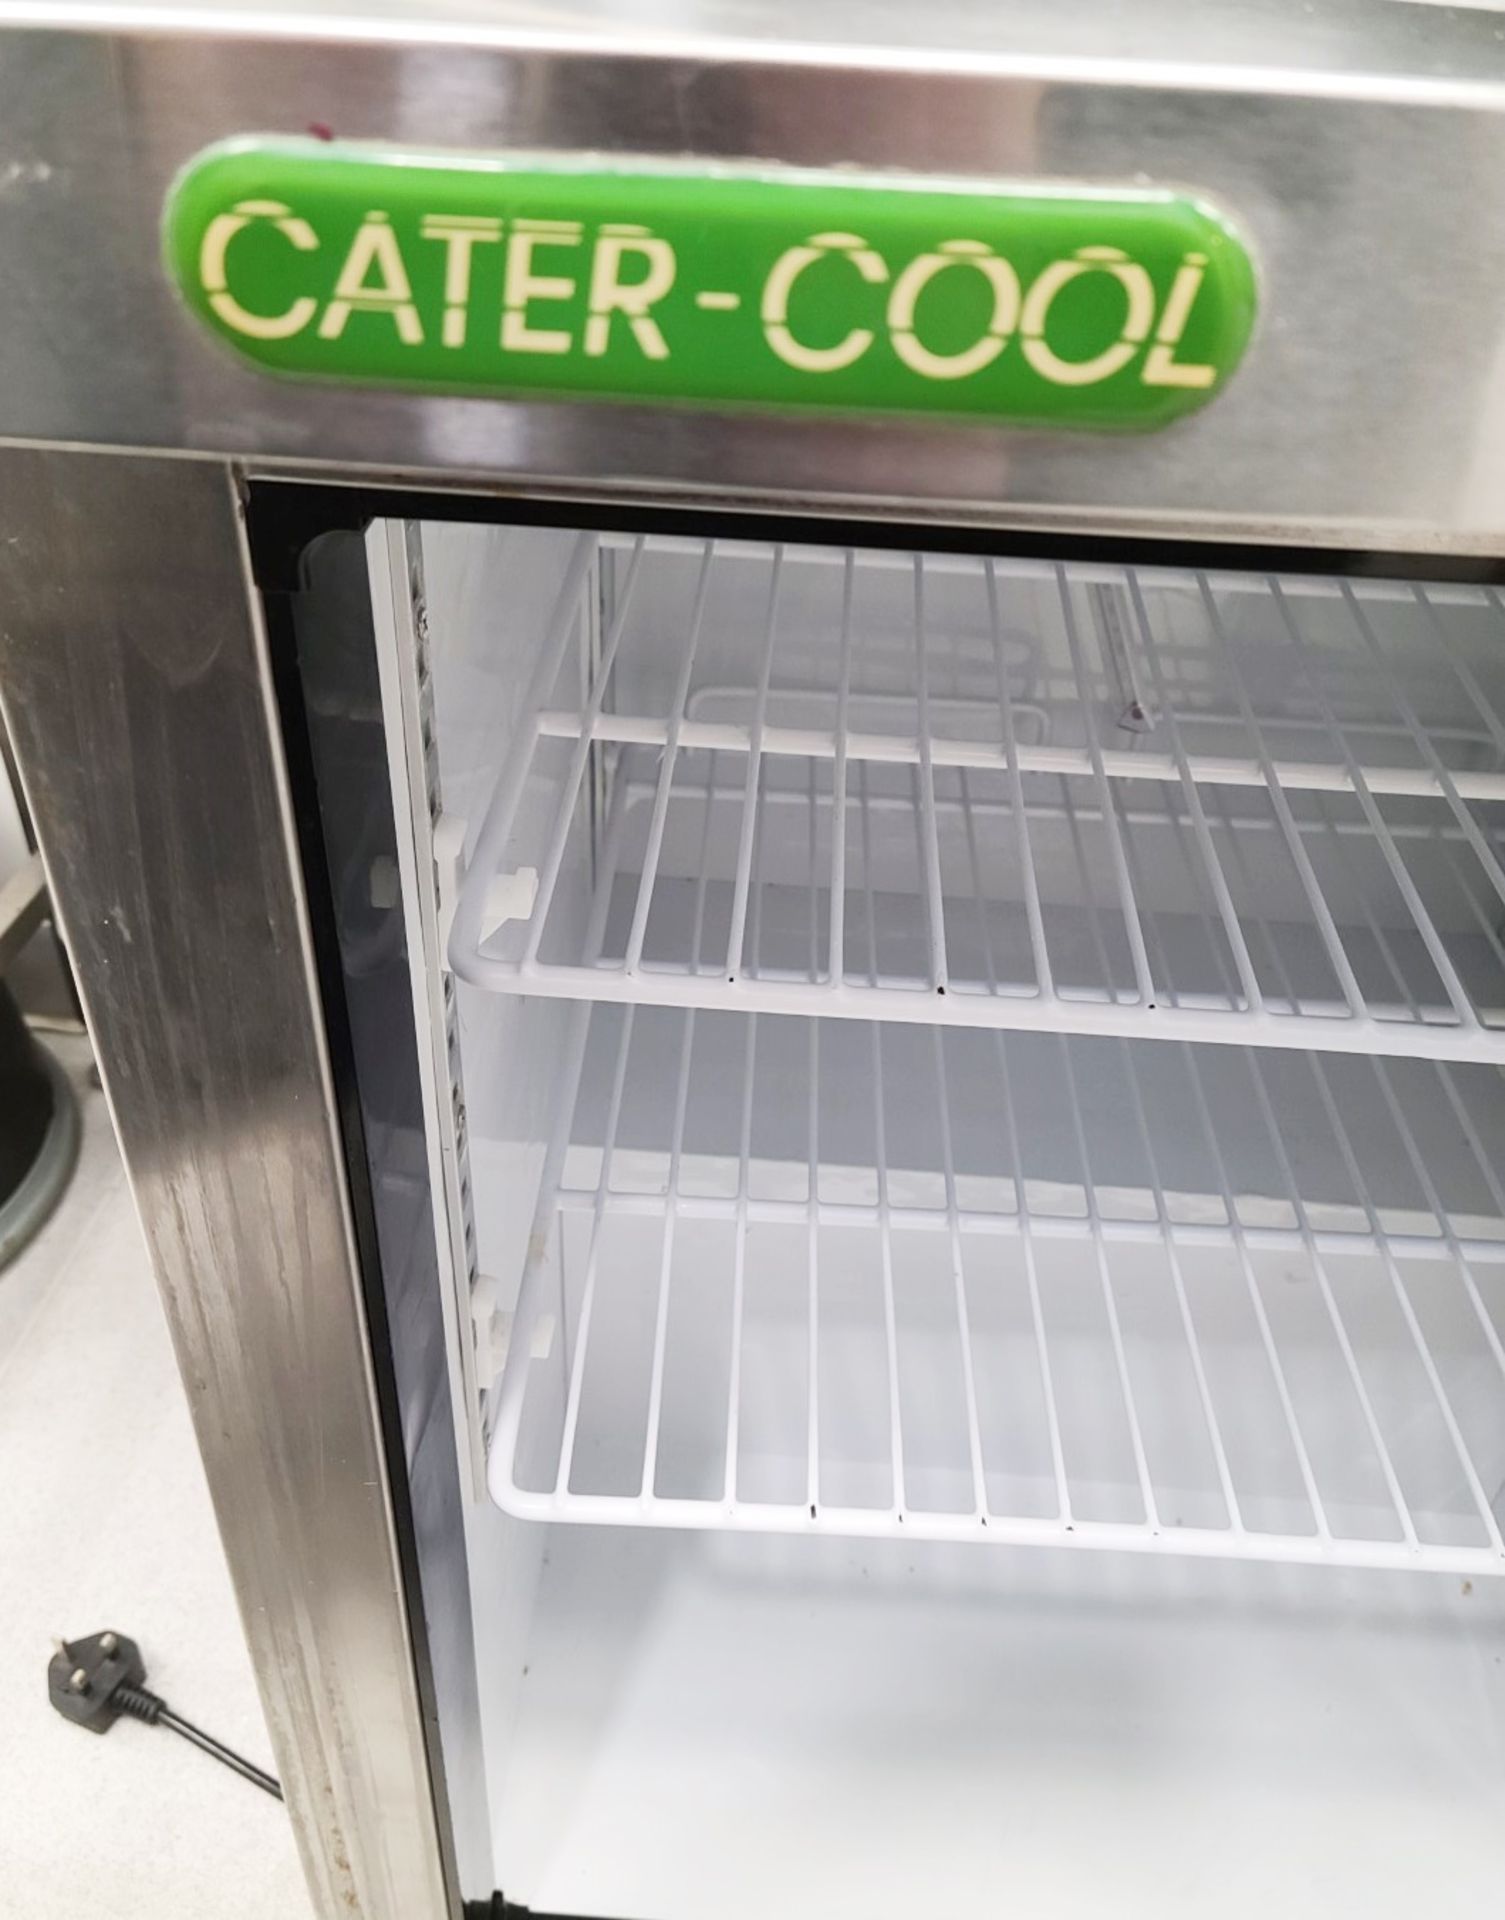 1 x CATER-COOL CK200RSS 170 Litre Under Counter Fridge With Stainless Steel Exterior - Image 2 of 6